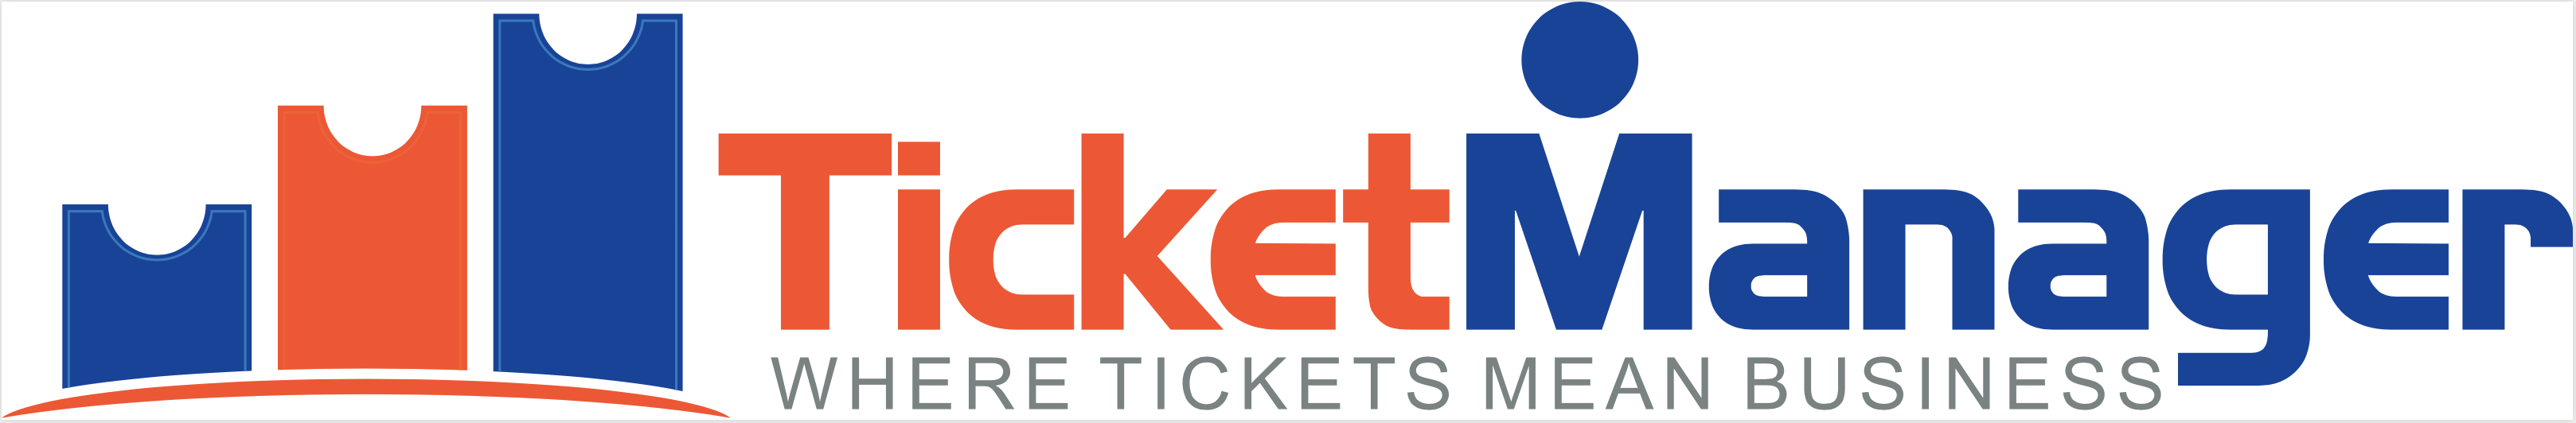 Ticket Manager